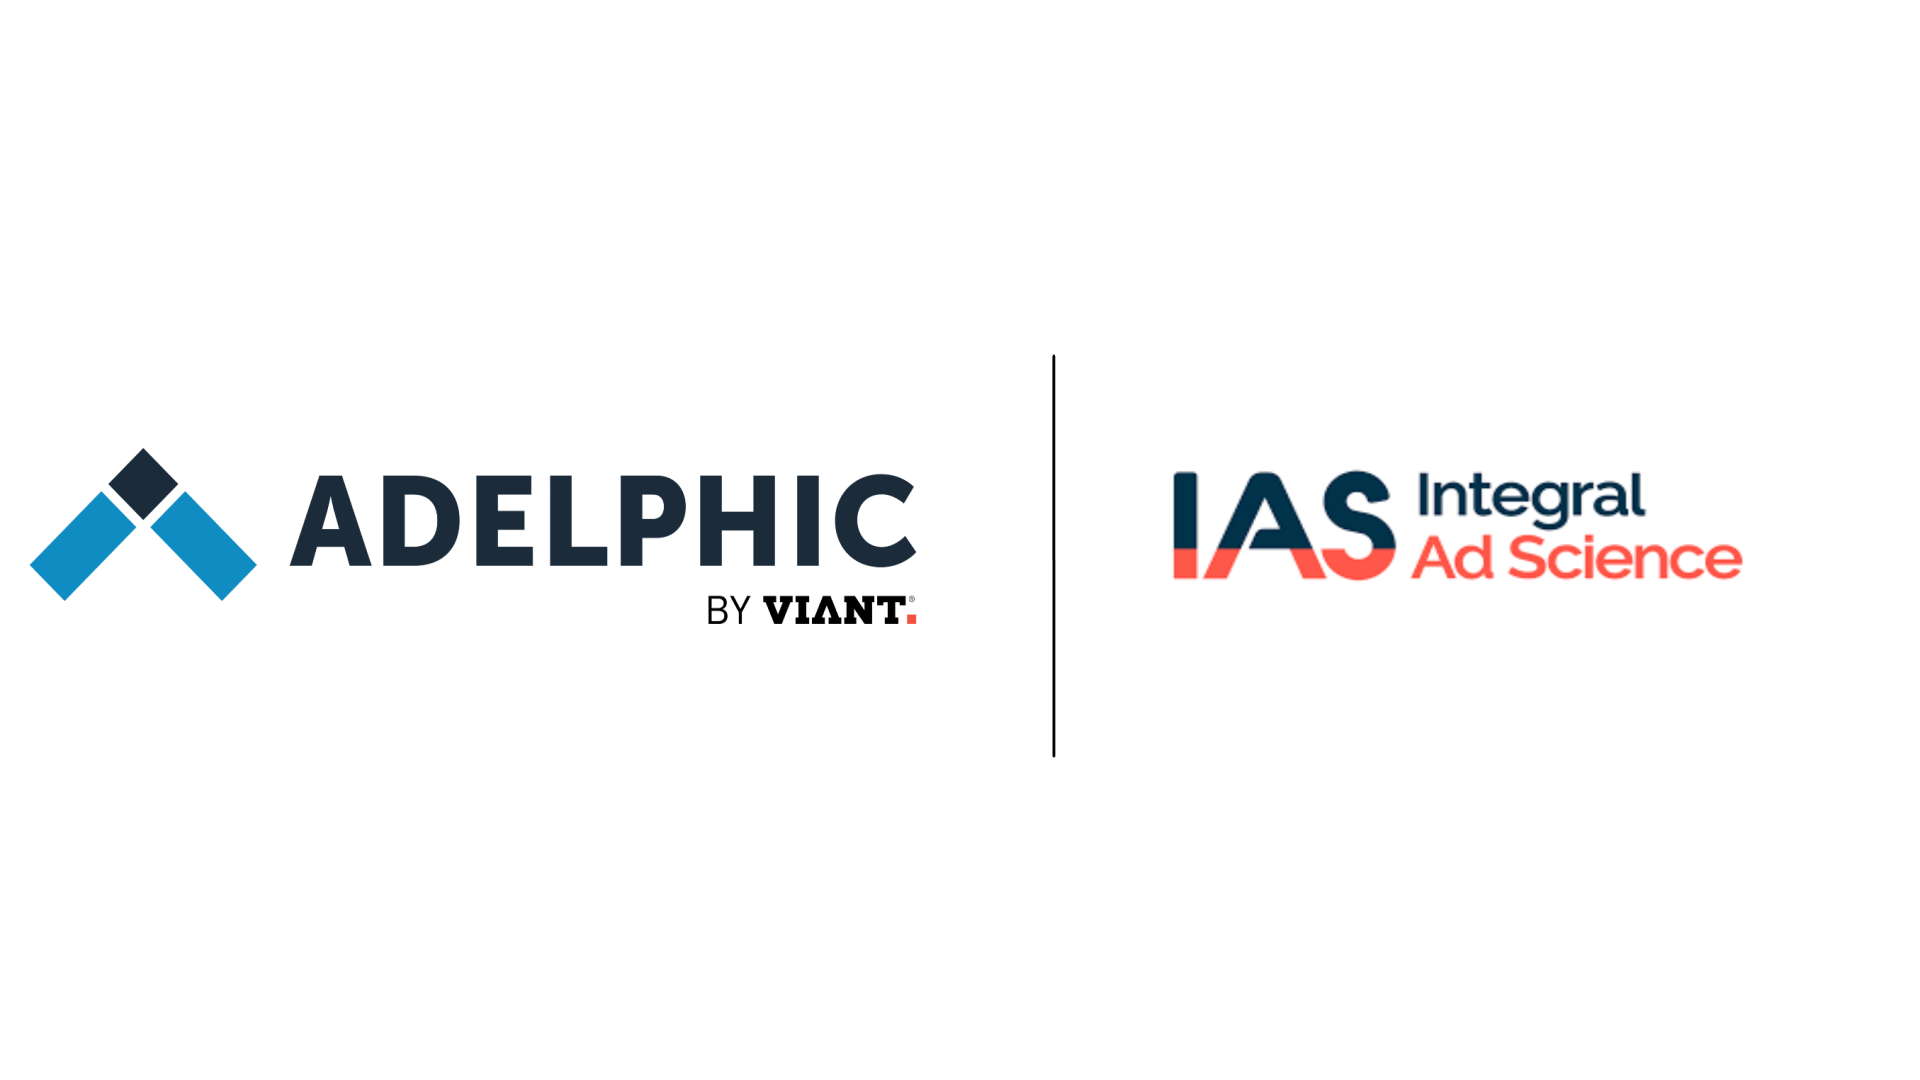 Adelphic teams up with IAS to enable pre-bid keyword filtering for brand safety | DeviceDaily.com